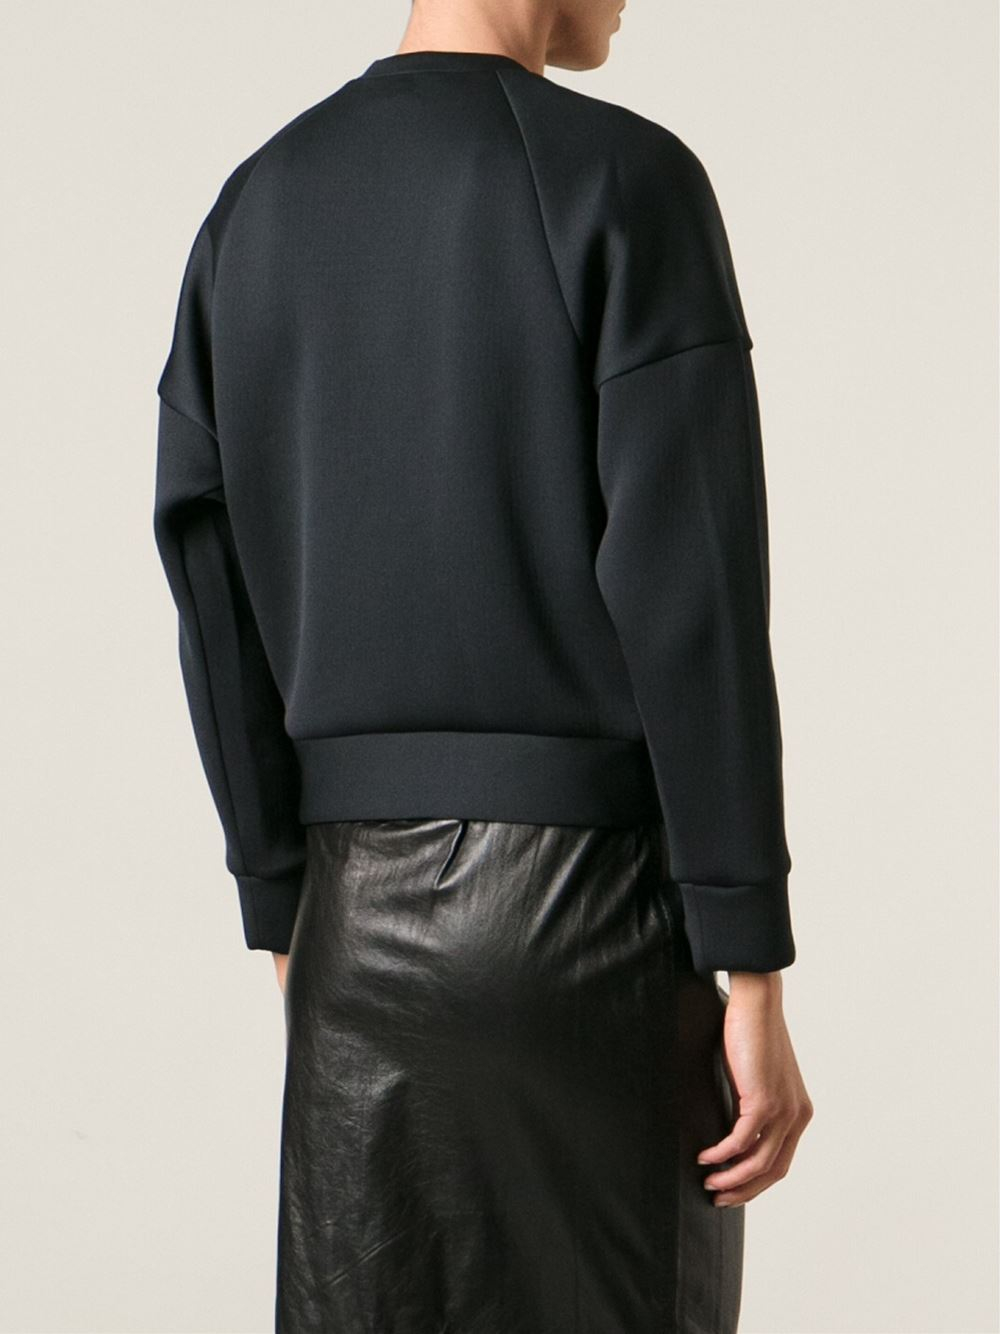 3.1 Phillip Lim Embroidered Poodle Sweatshirt in Black | Lyst